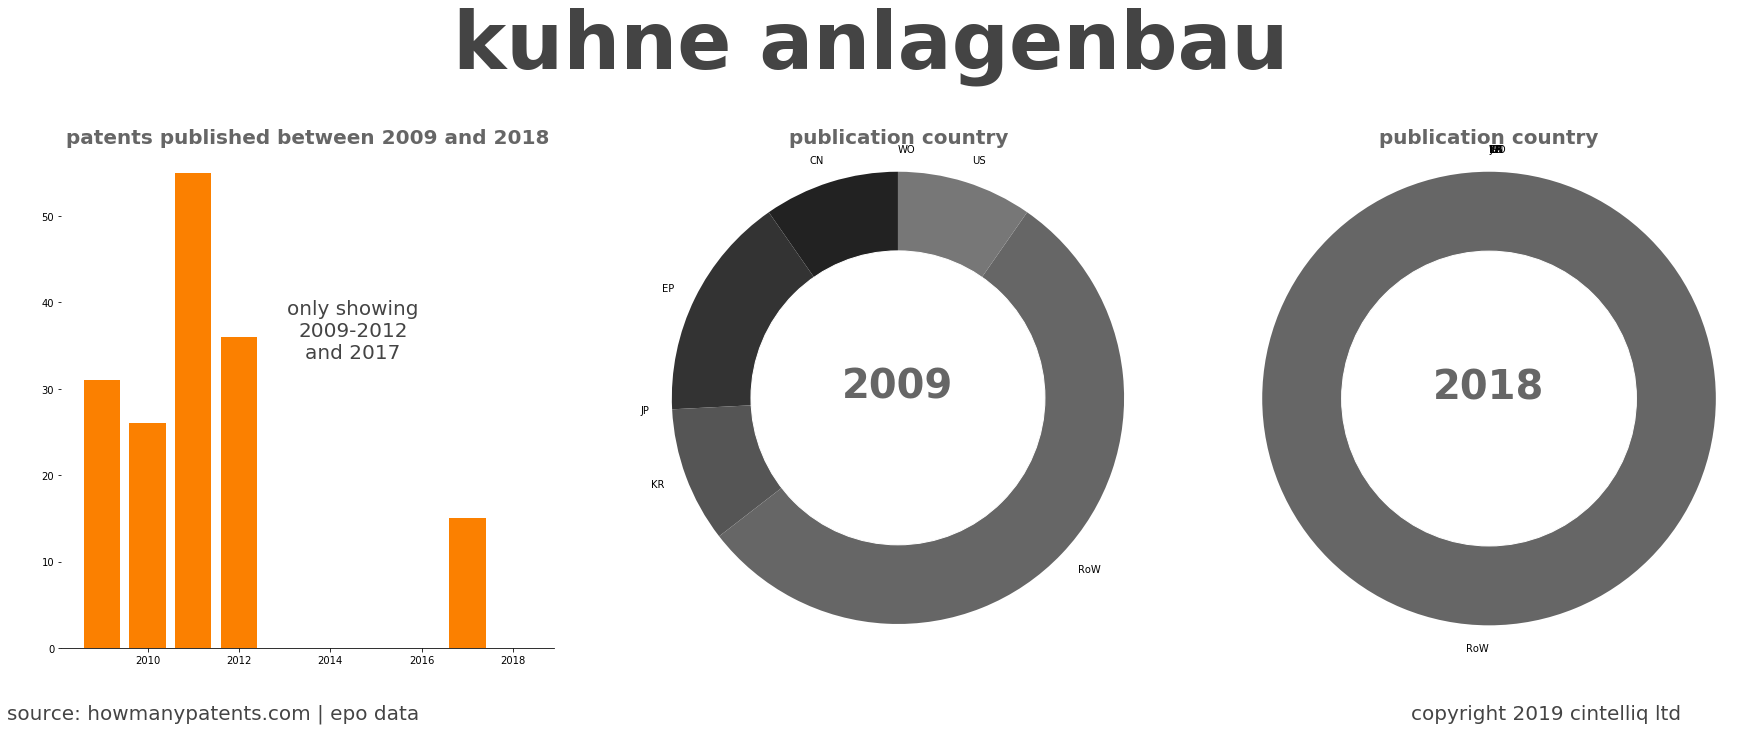 summary of patents for Kuhne Anlagenbau